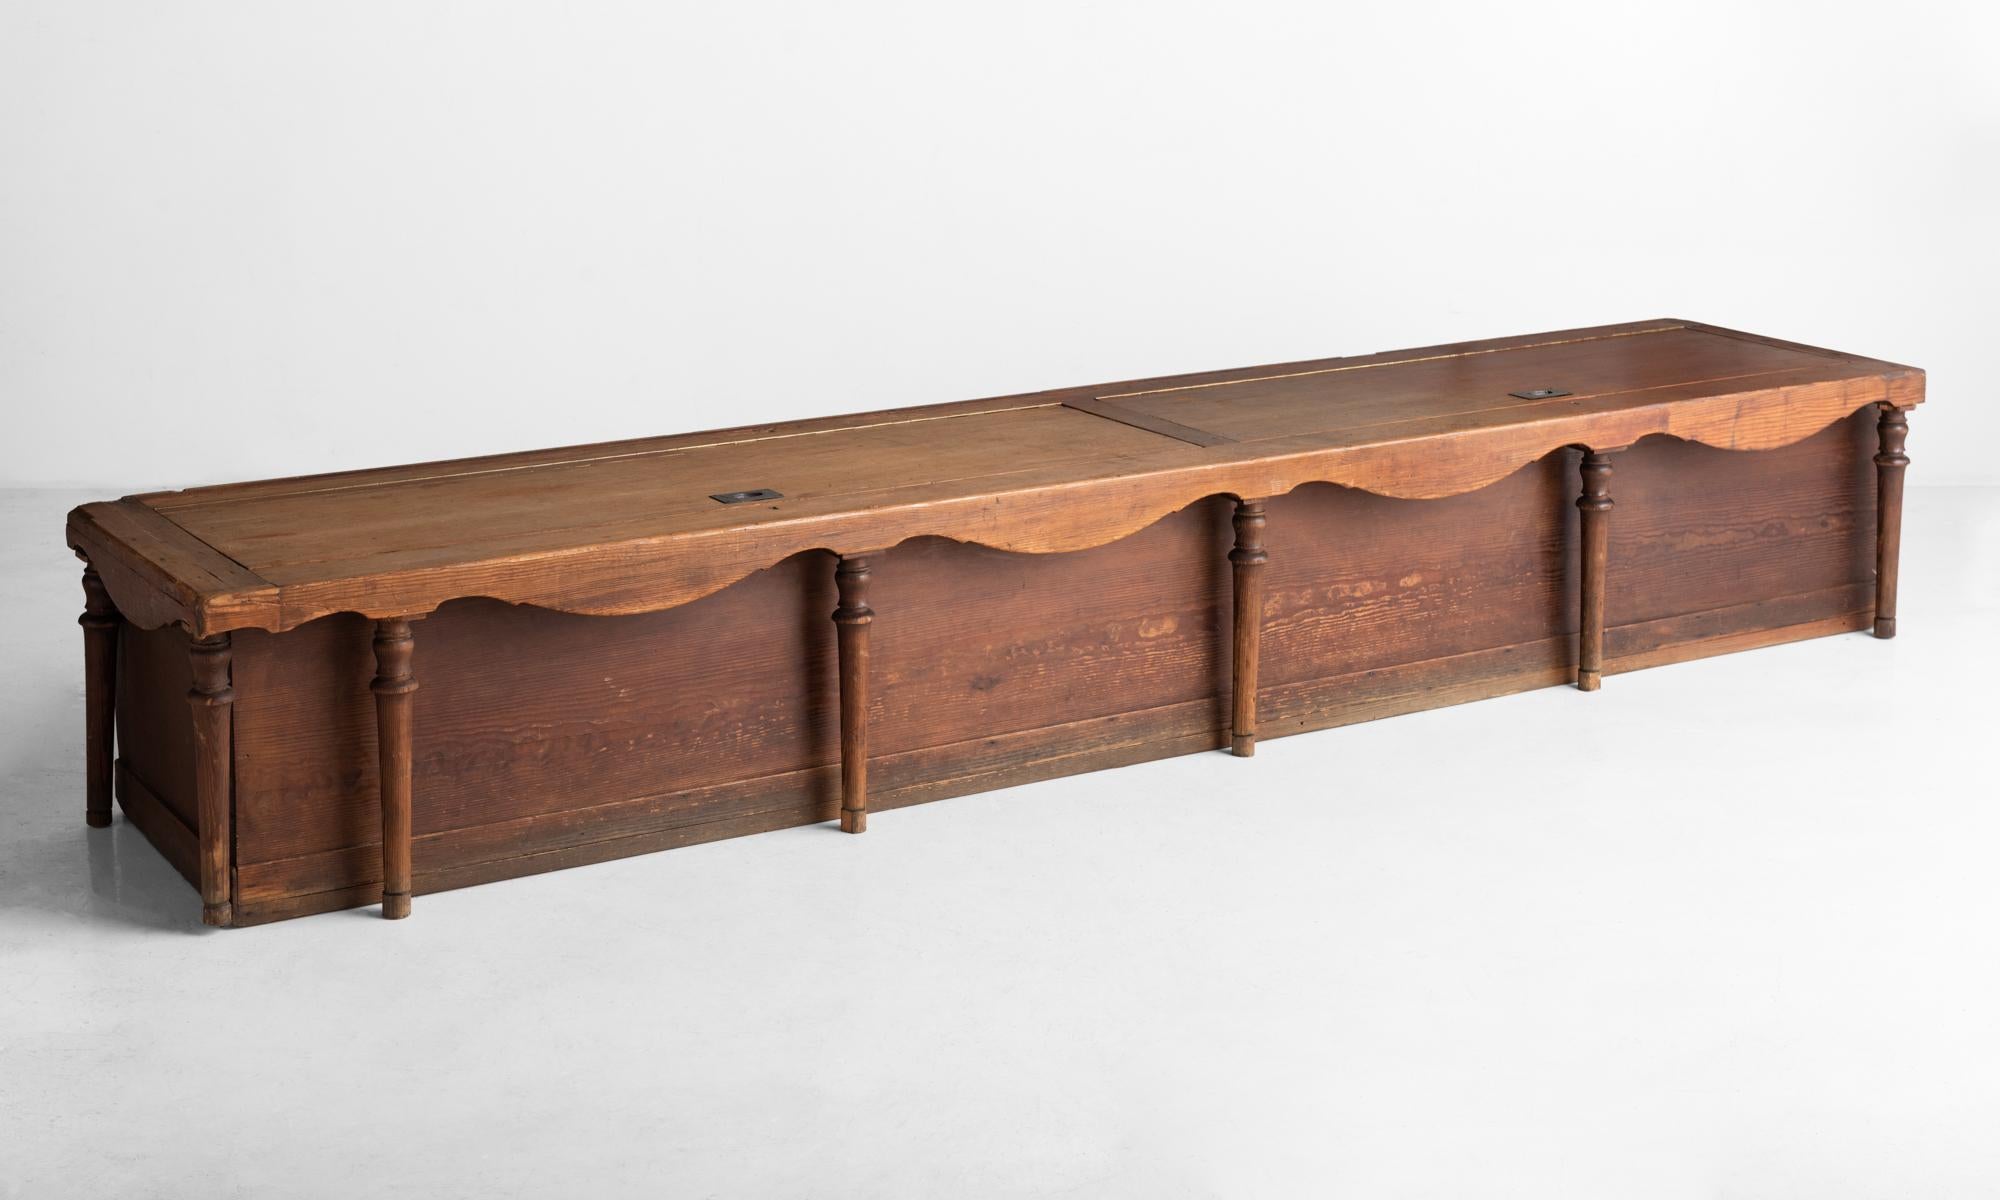 Chestnut Boat Bench, America, circa 1900.

With baluster supports, brass hardware, and storage underneath.

Measures: 104.5